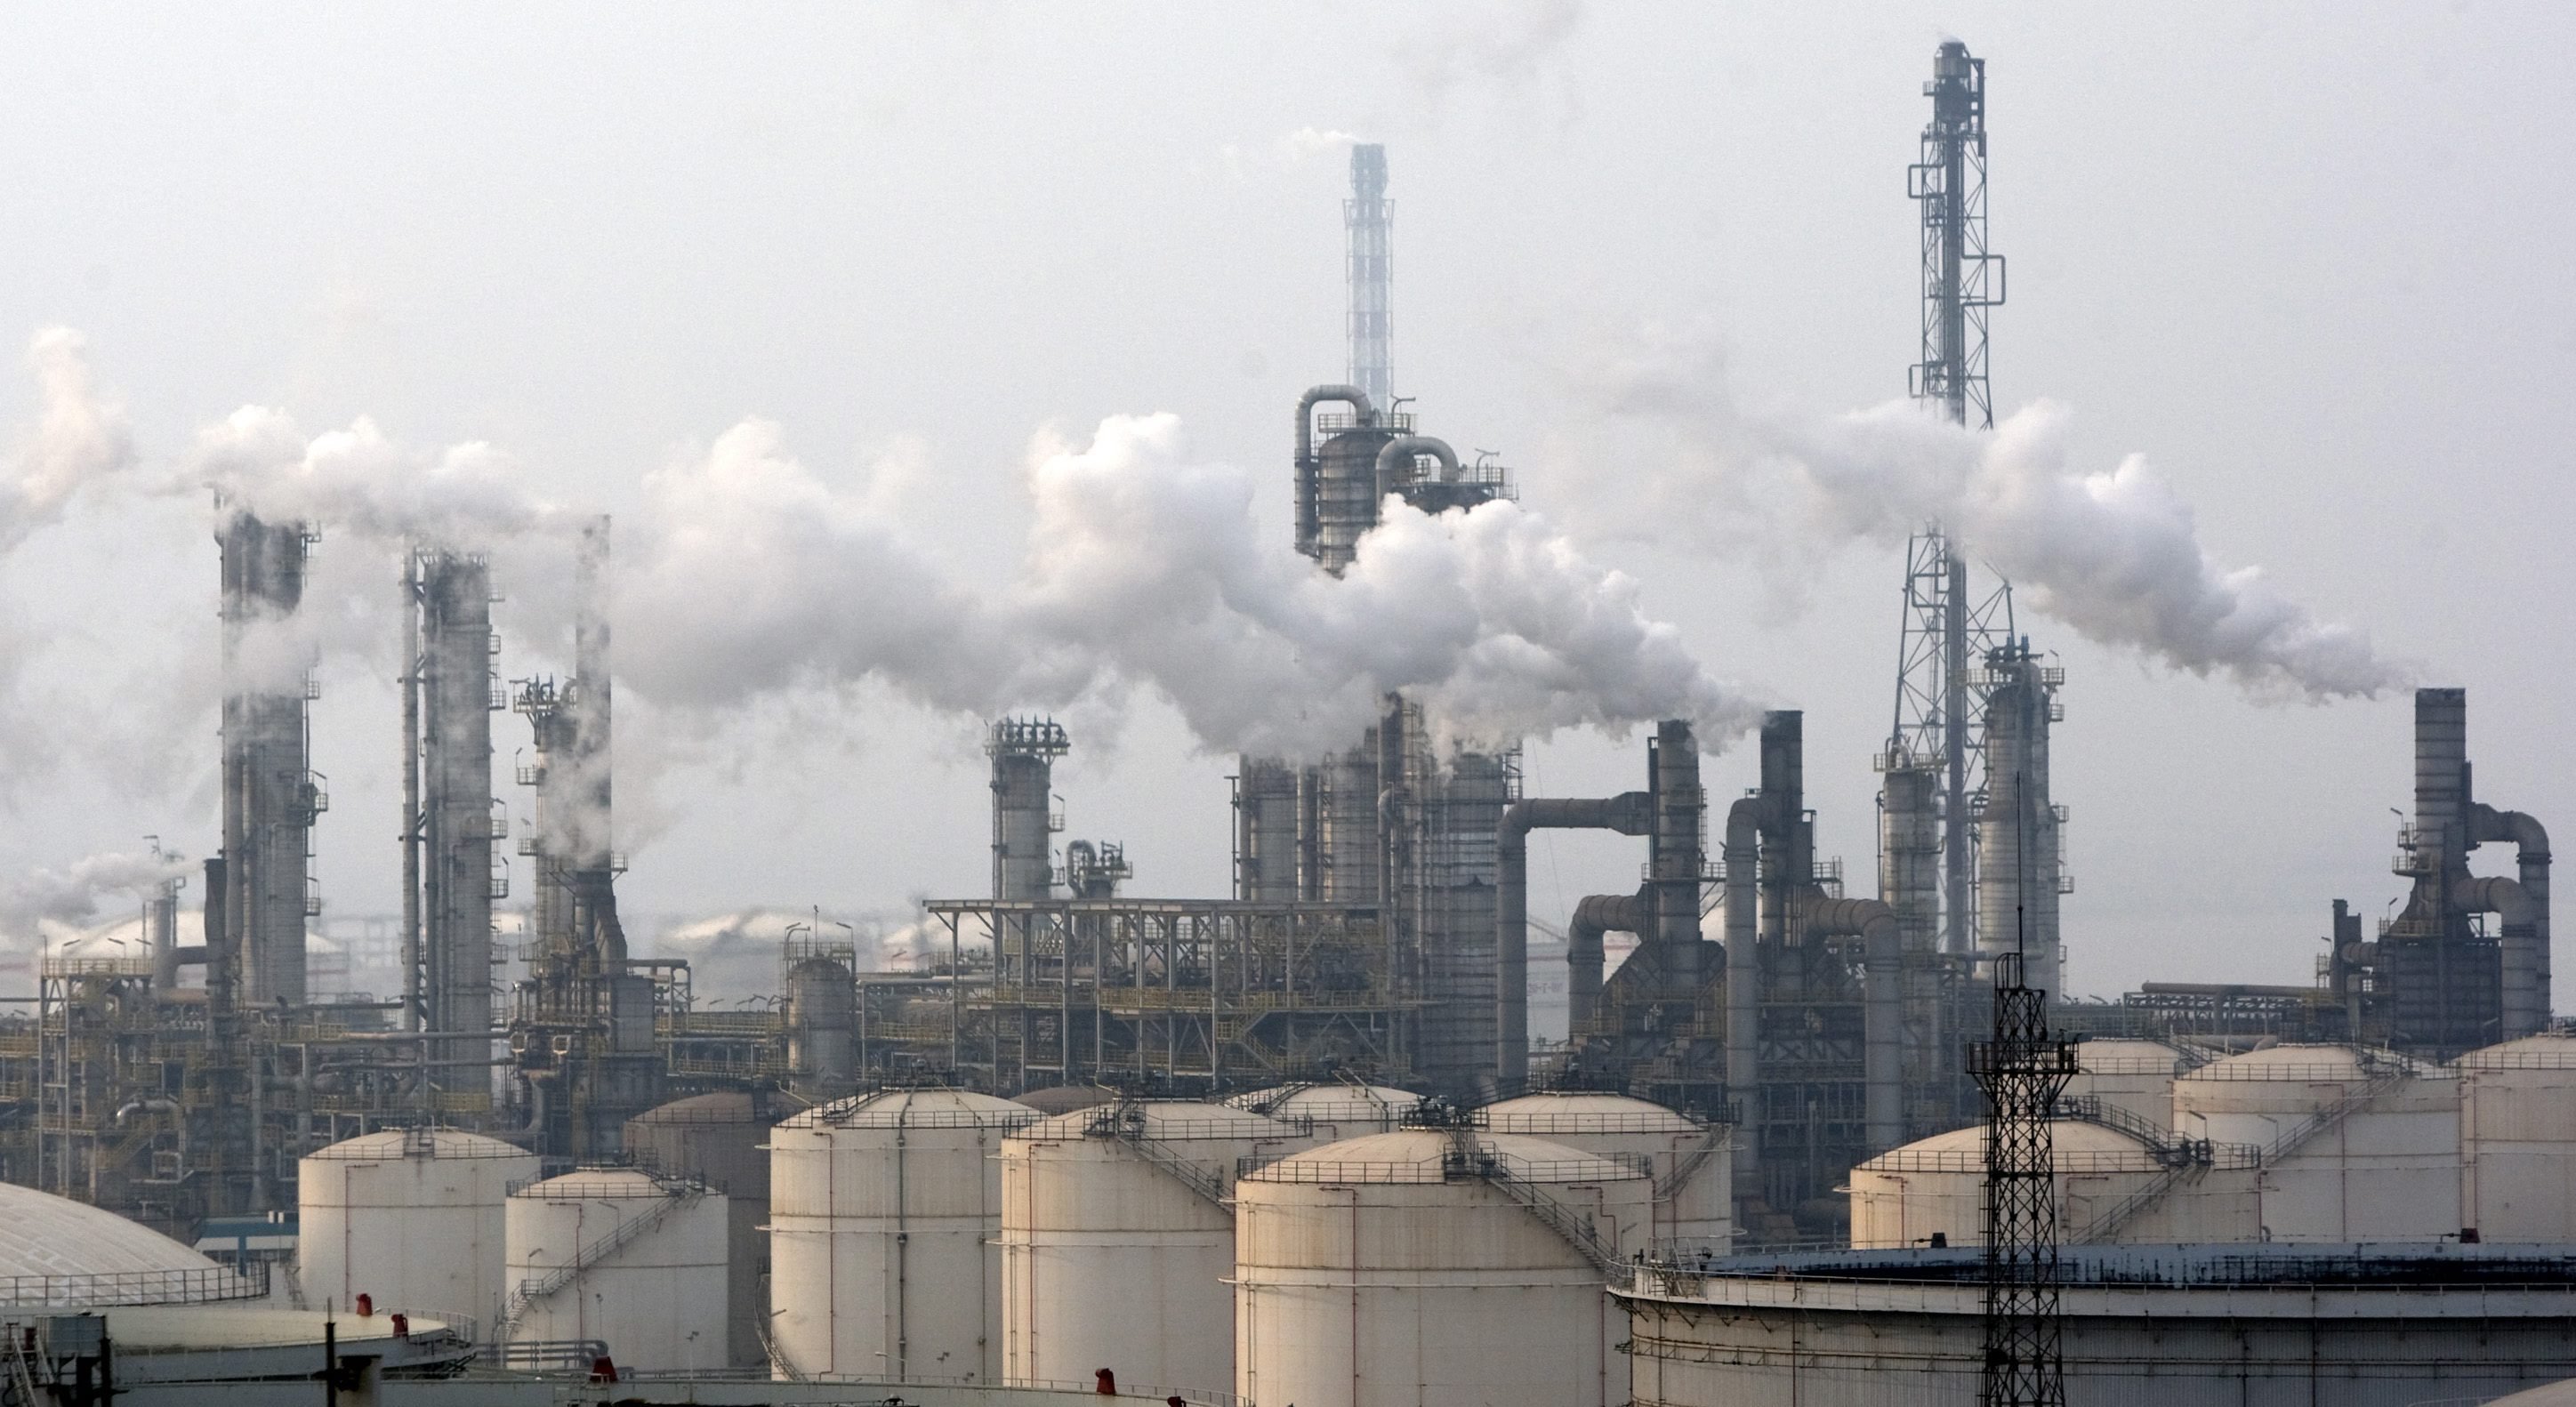 Refining economics will have to improve to justify the expense of building and operating costly plants. Photo: EPA